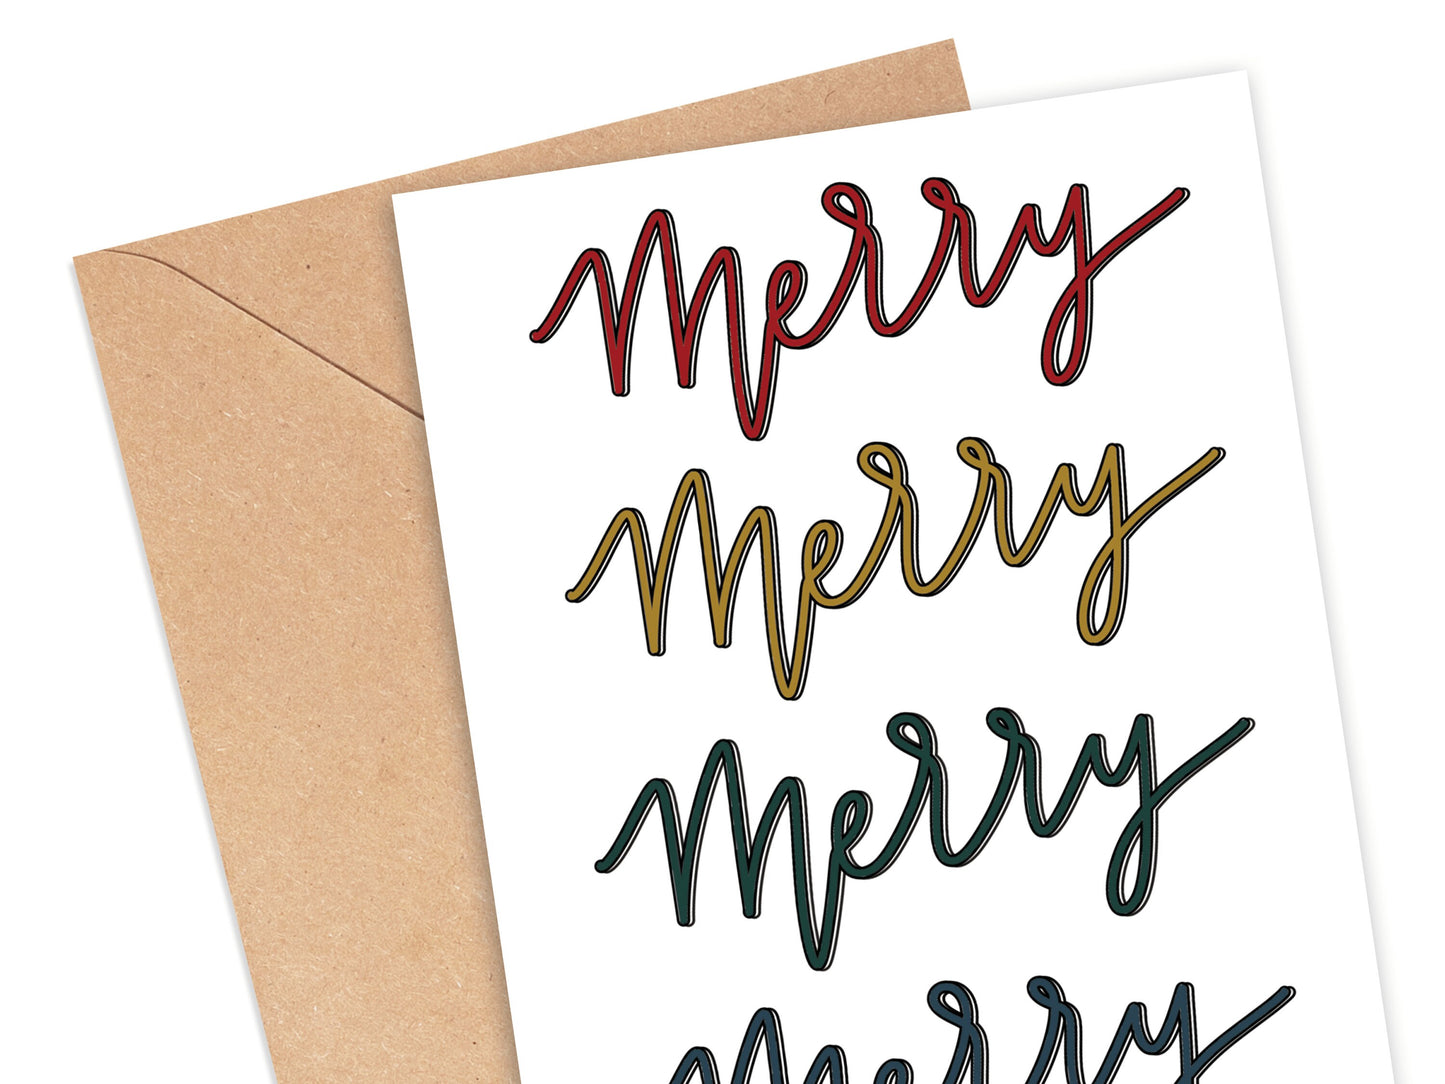 Merry Christmas Card Simply Happy Cards